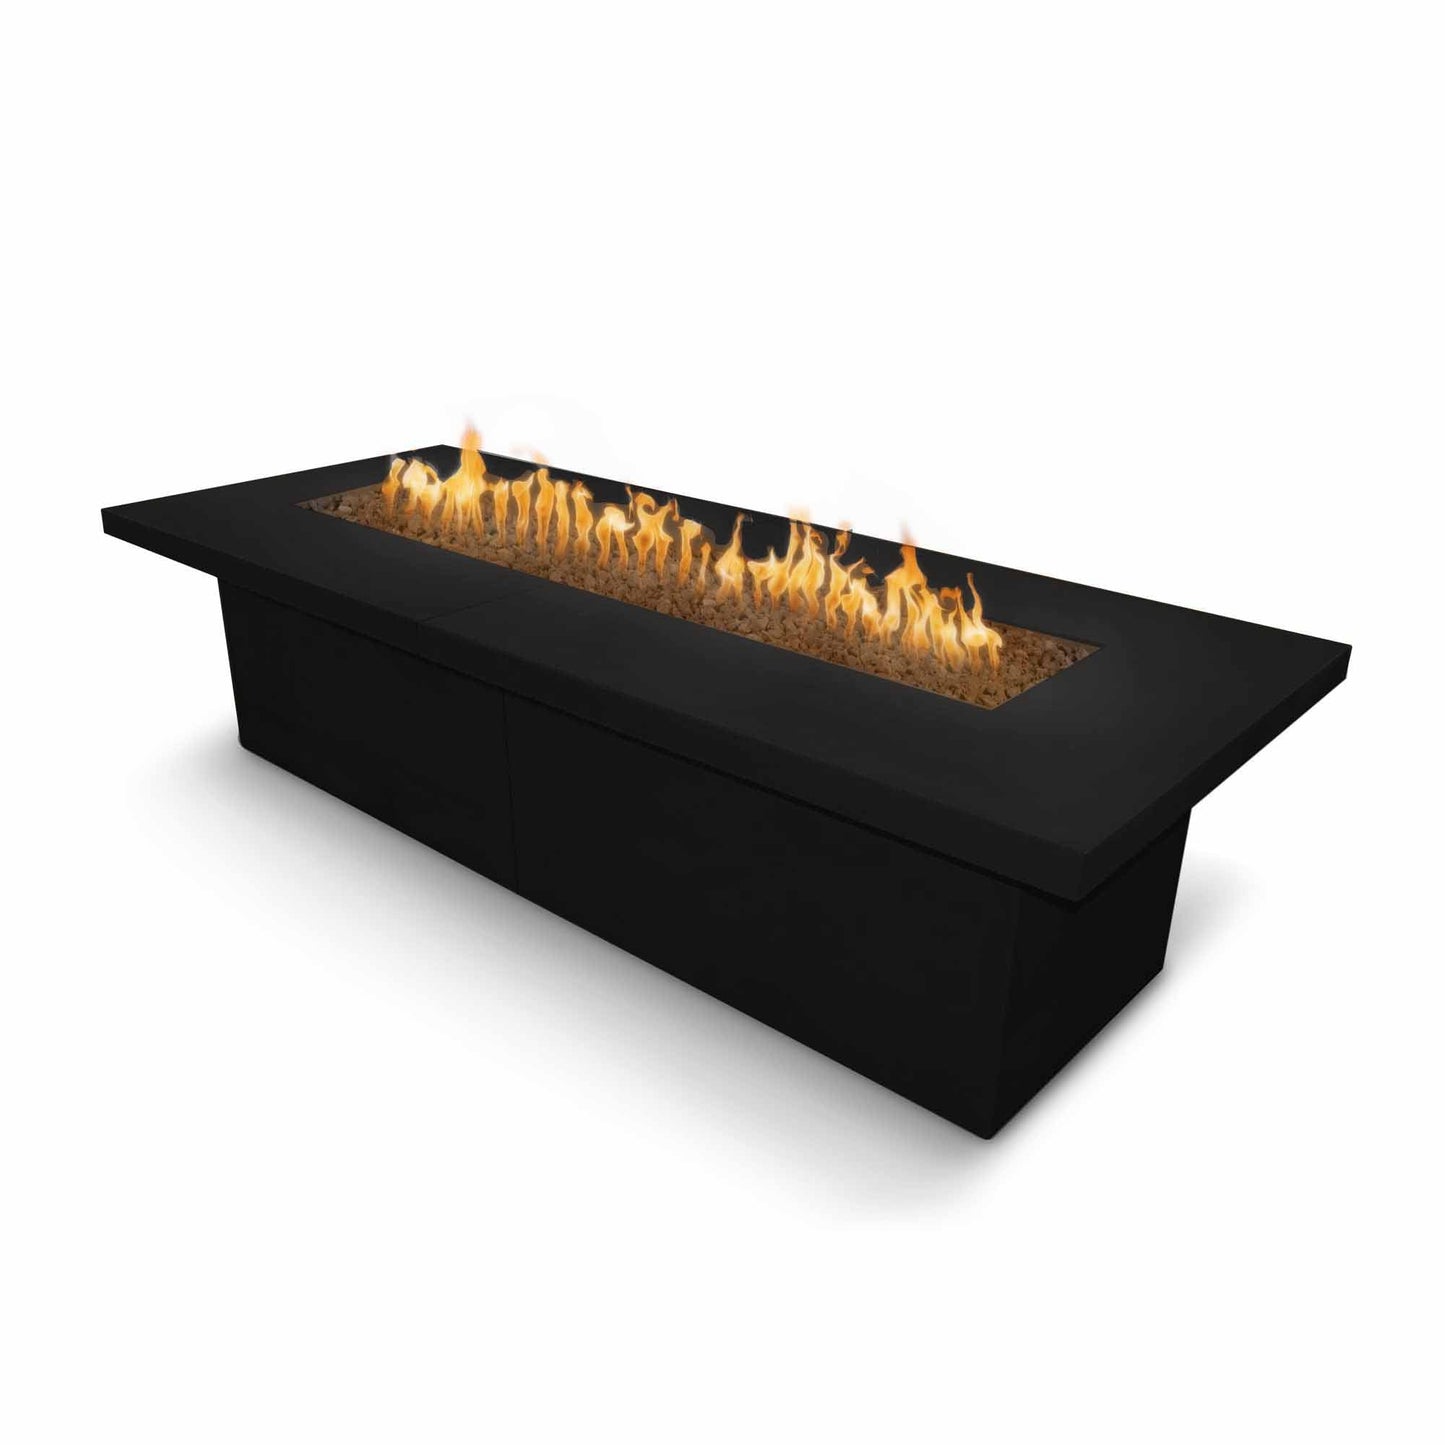 The Outdoor Plus Rectangular Newport 72" Silver Vein Powder Coated Metal Liquid Propane Fire Pit with Match Lit Ignition